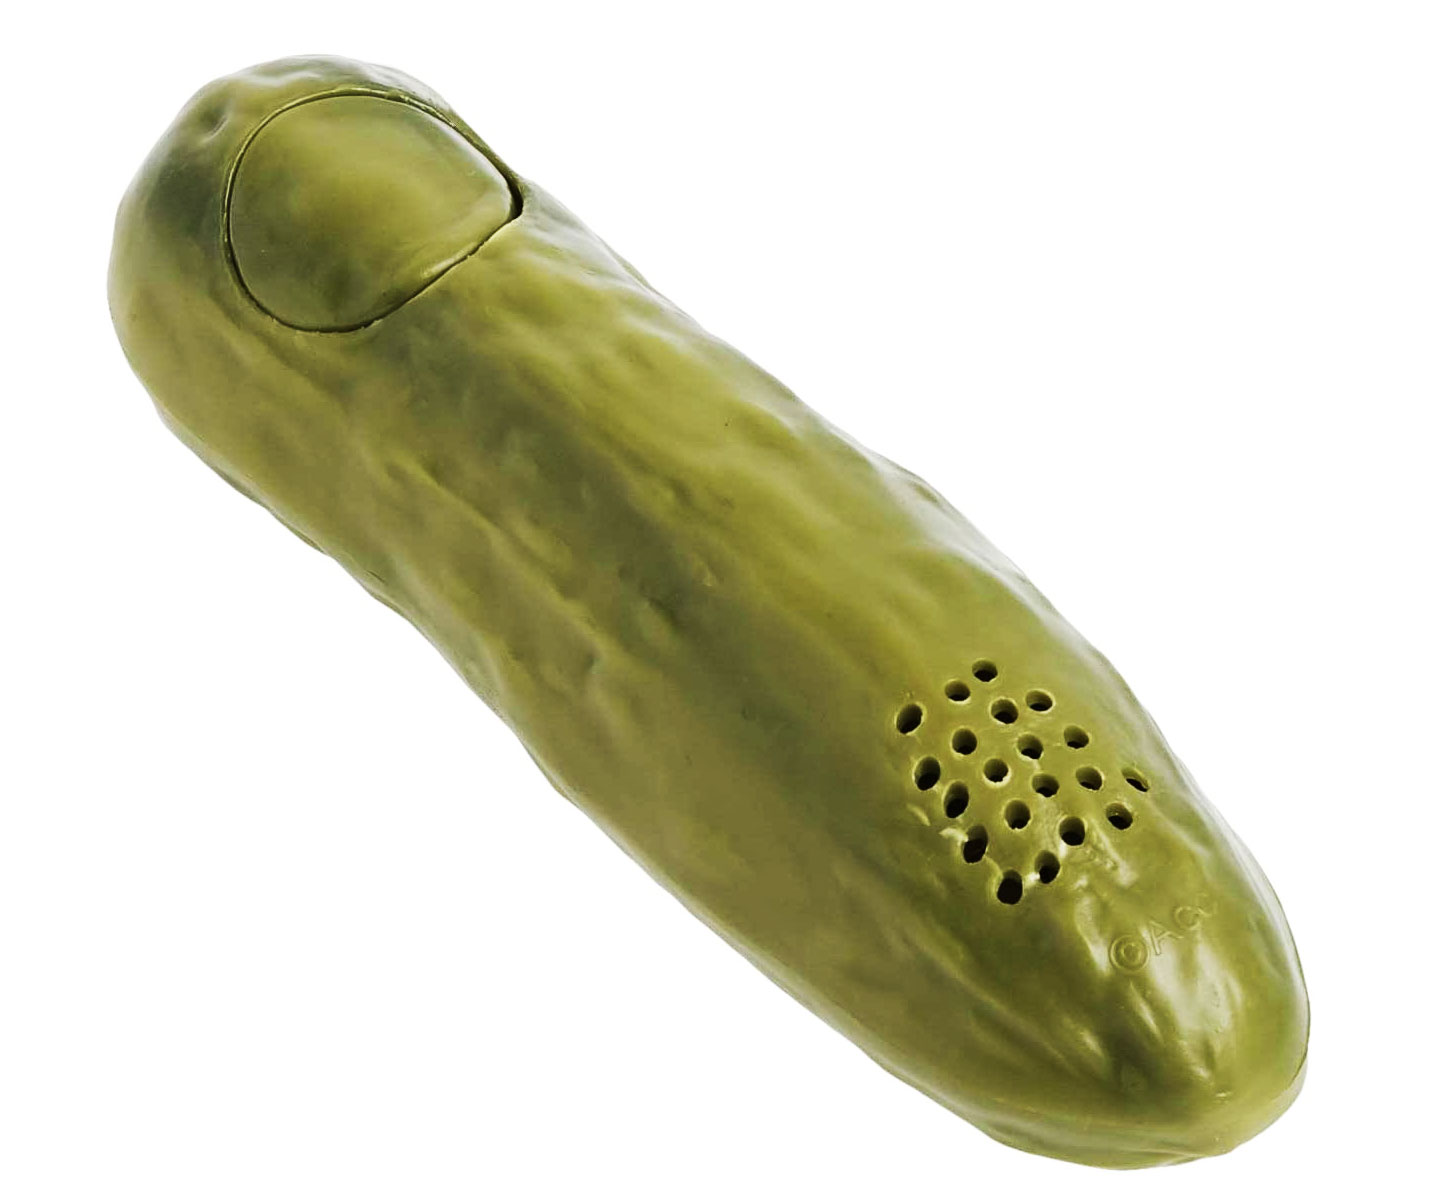 The Yodelling Pickle